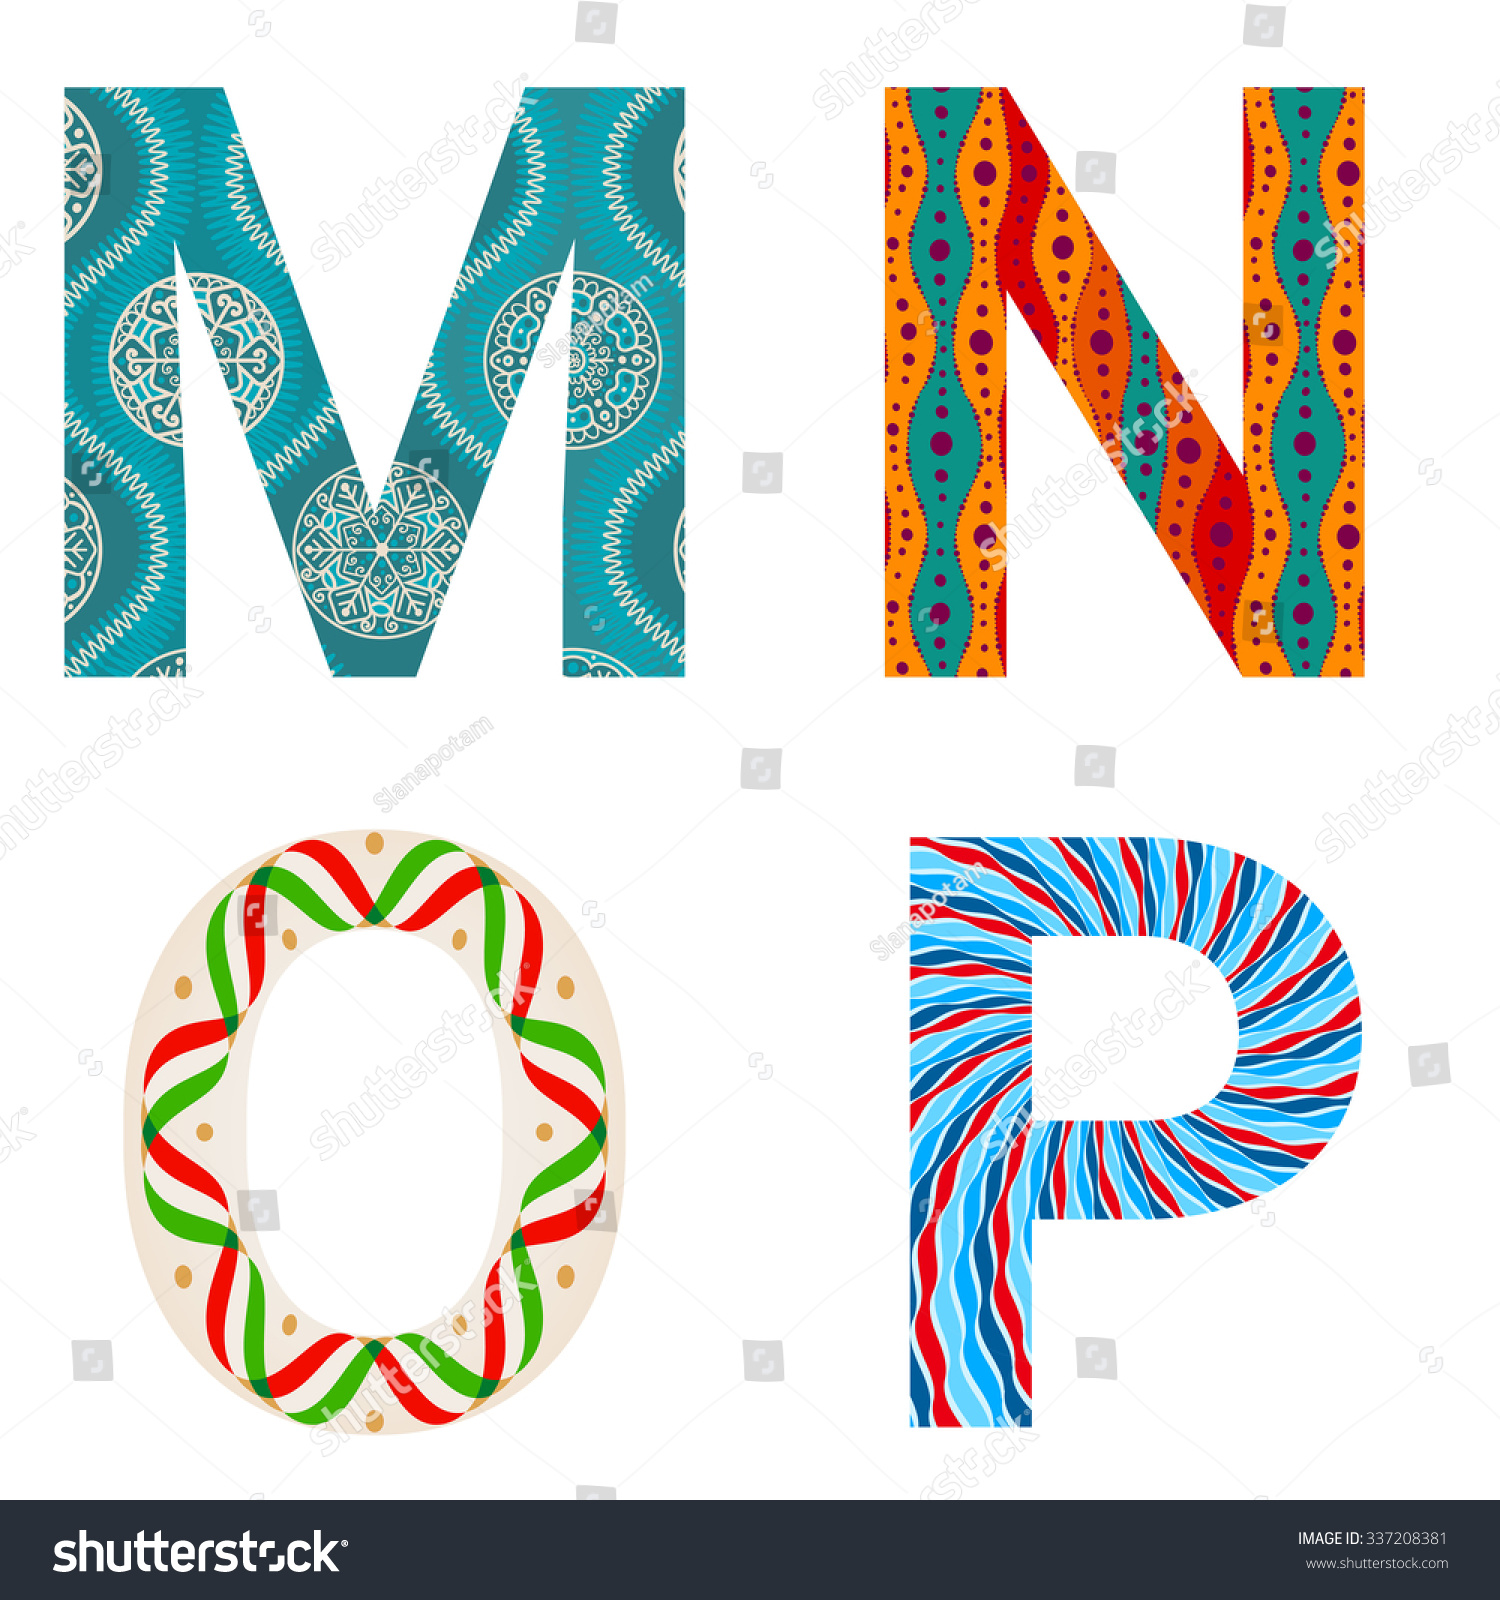 Set Colorful Patterned Letters M N Stock Vector 337208381 - Shutterstock